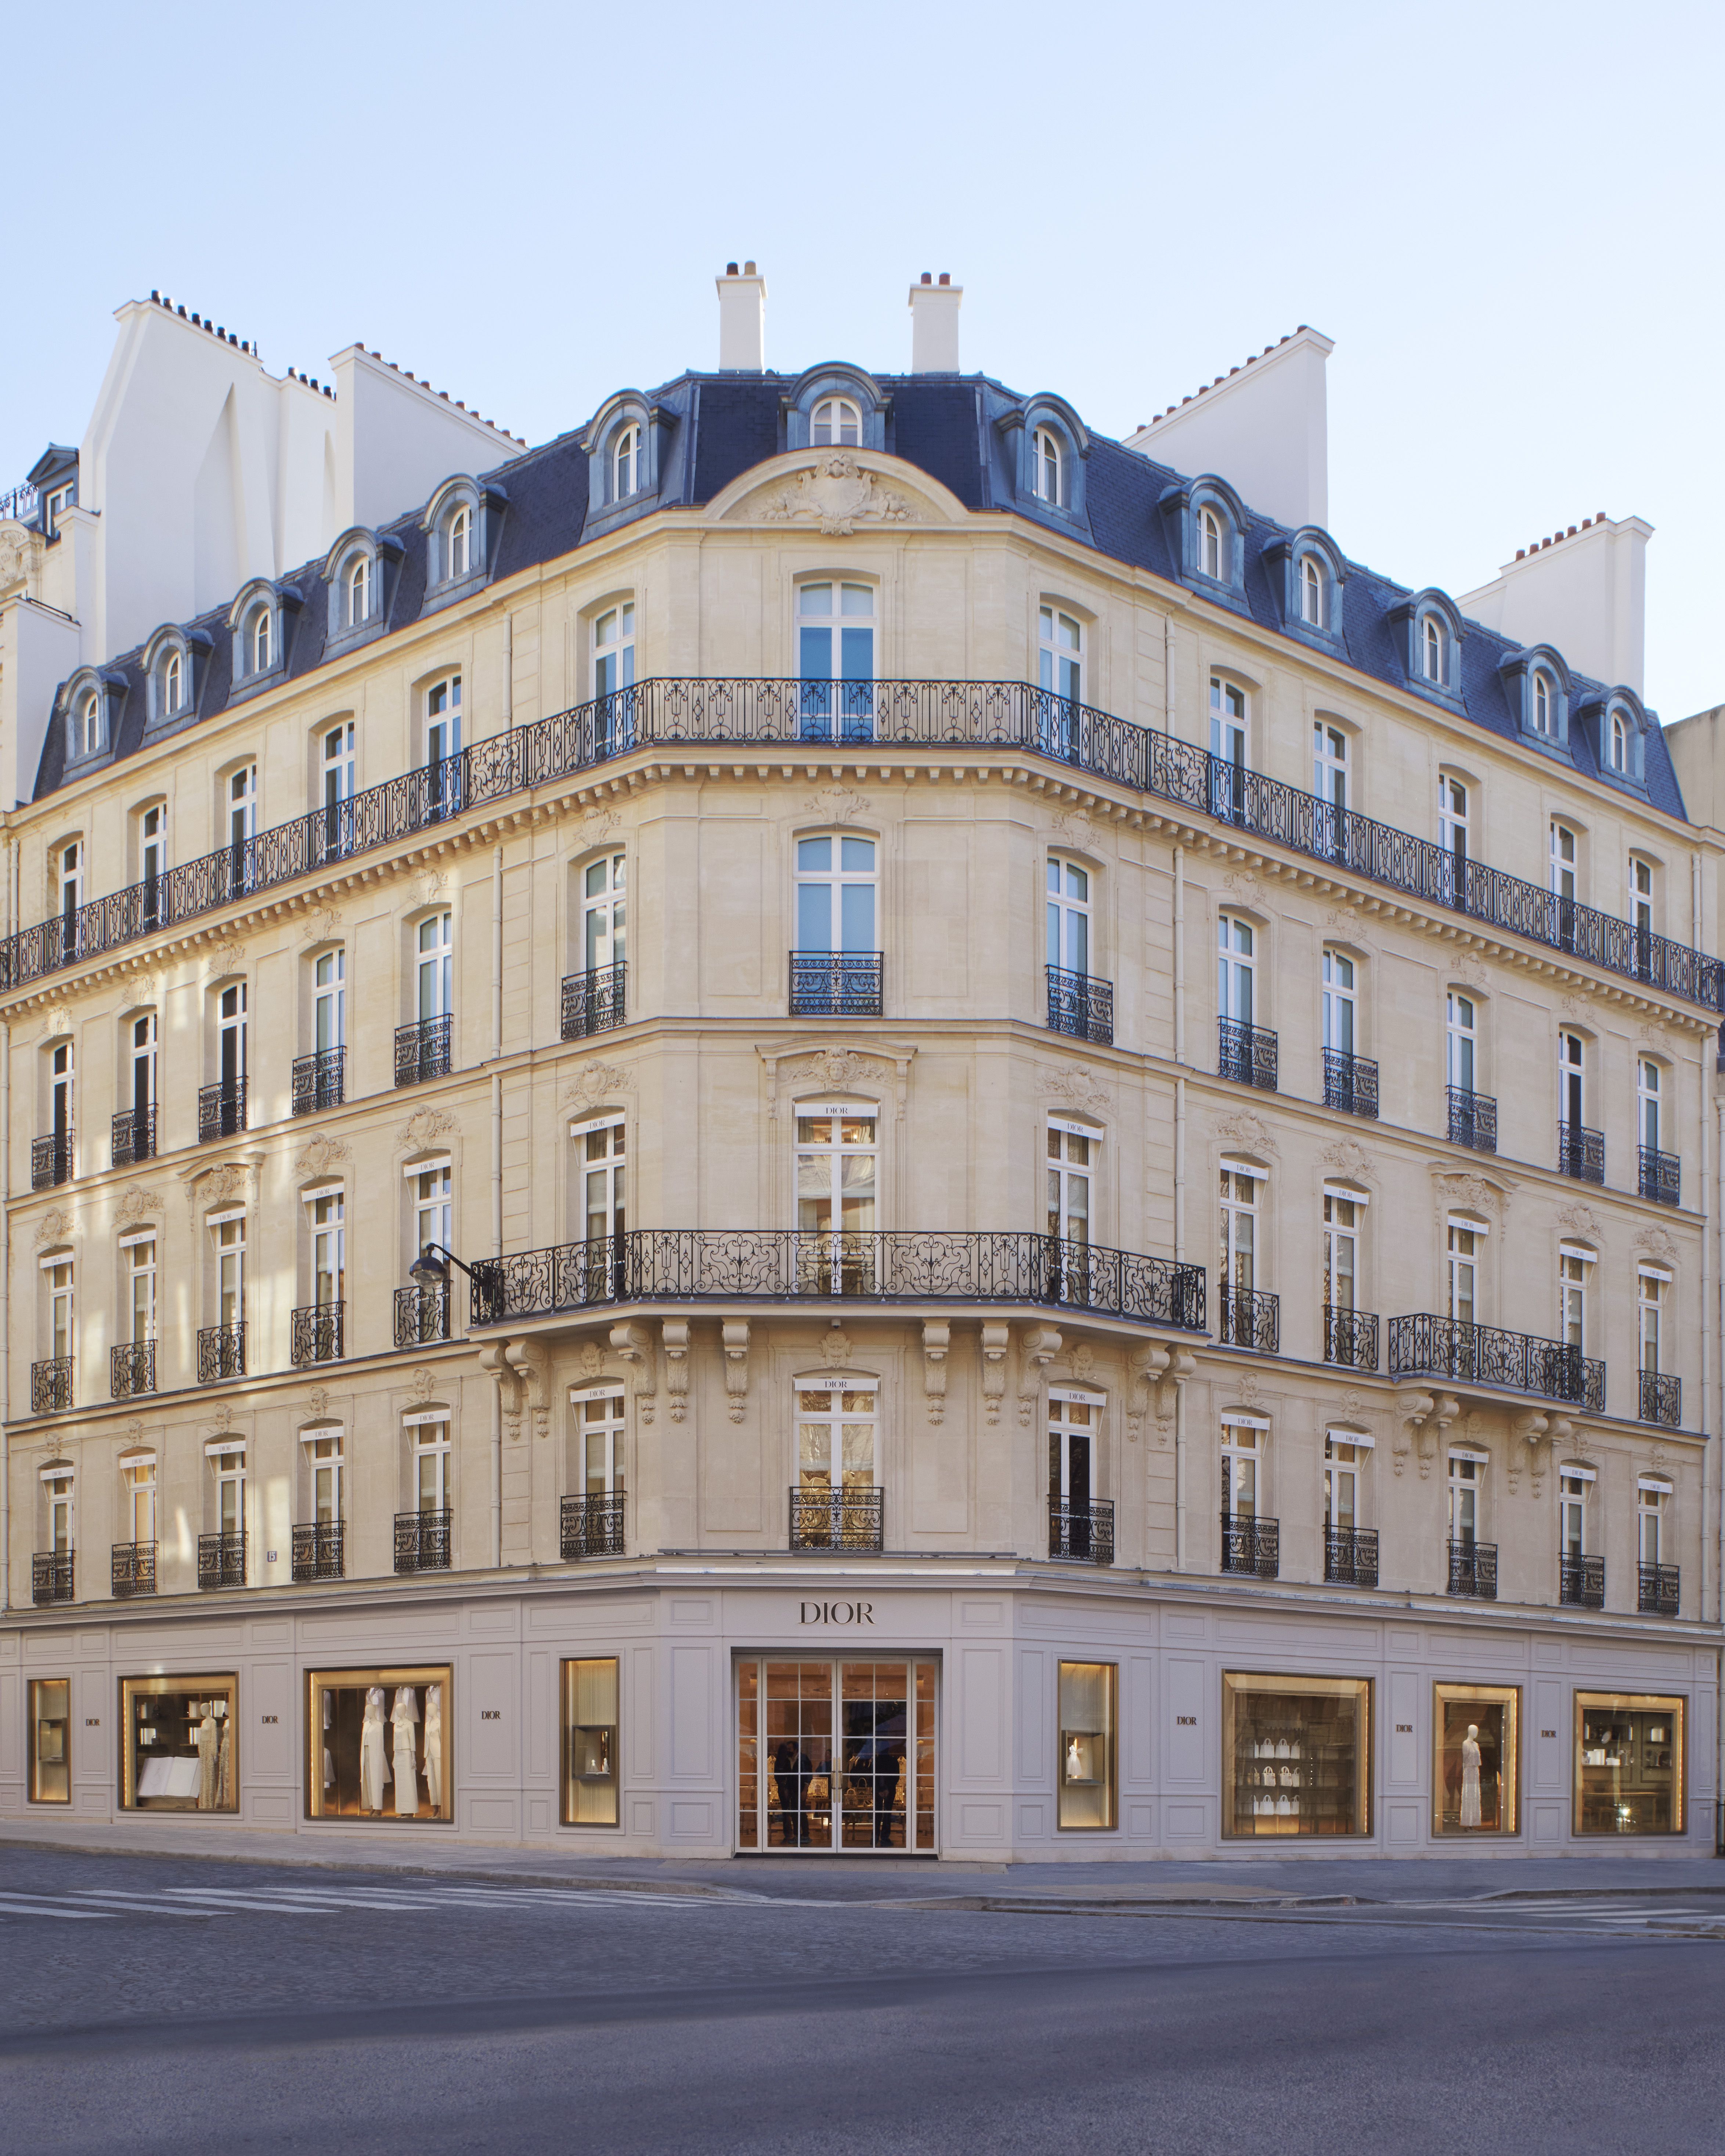 Bowled over by Dior in Paris  The Good Life France